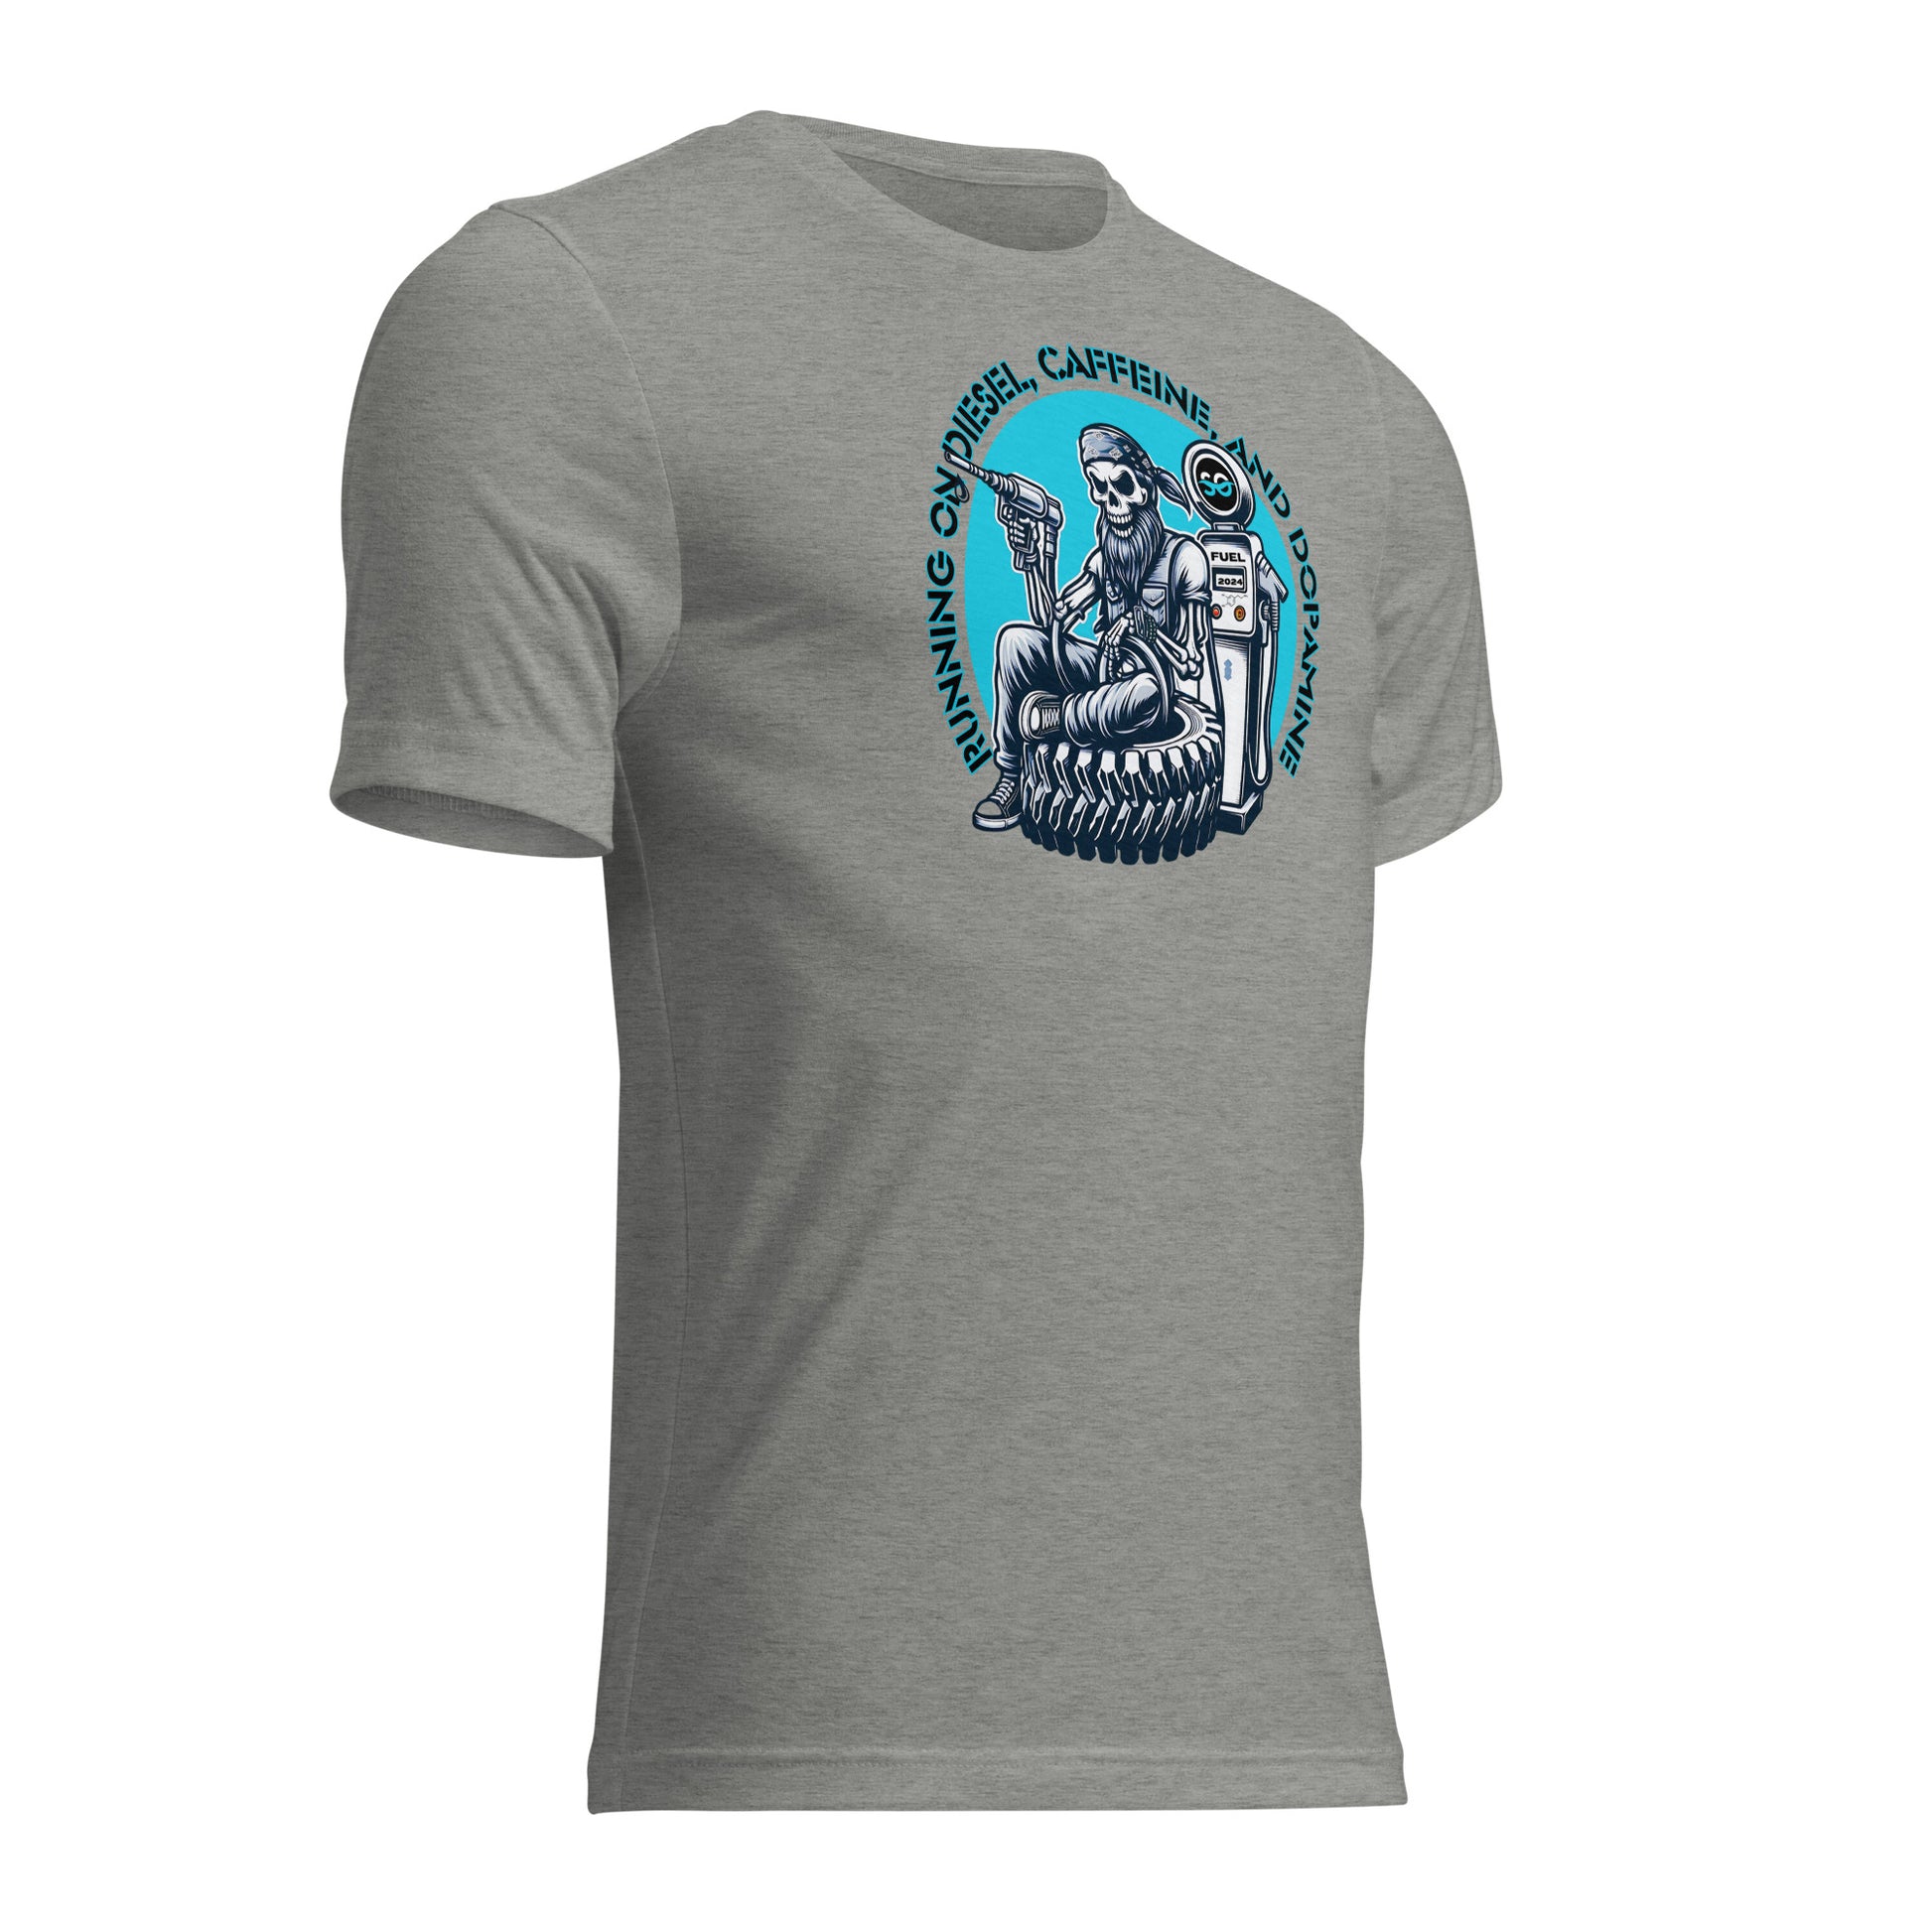 a grey t - shirt with an image of a man on a motorcycle